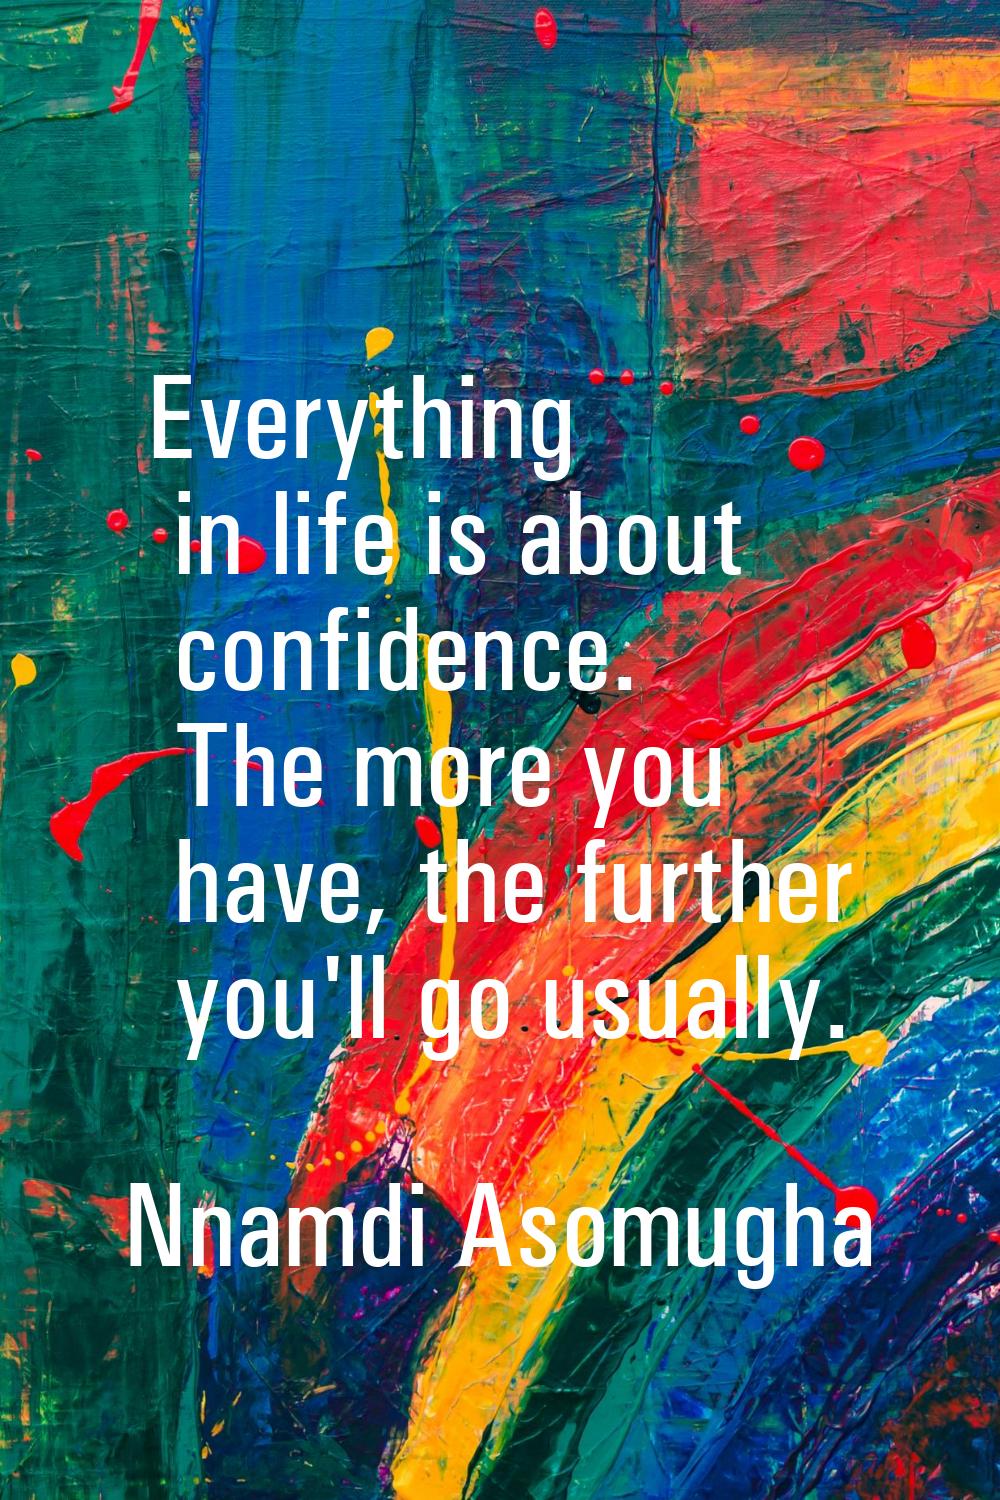 Everything in life is about confidence. The more you have, the further you'll go usually.